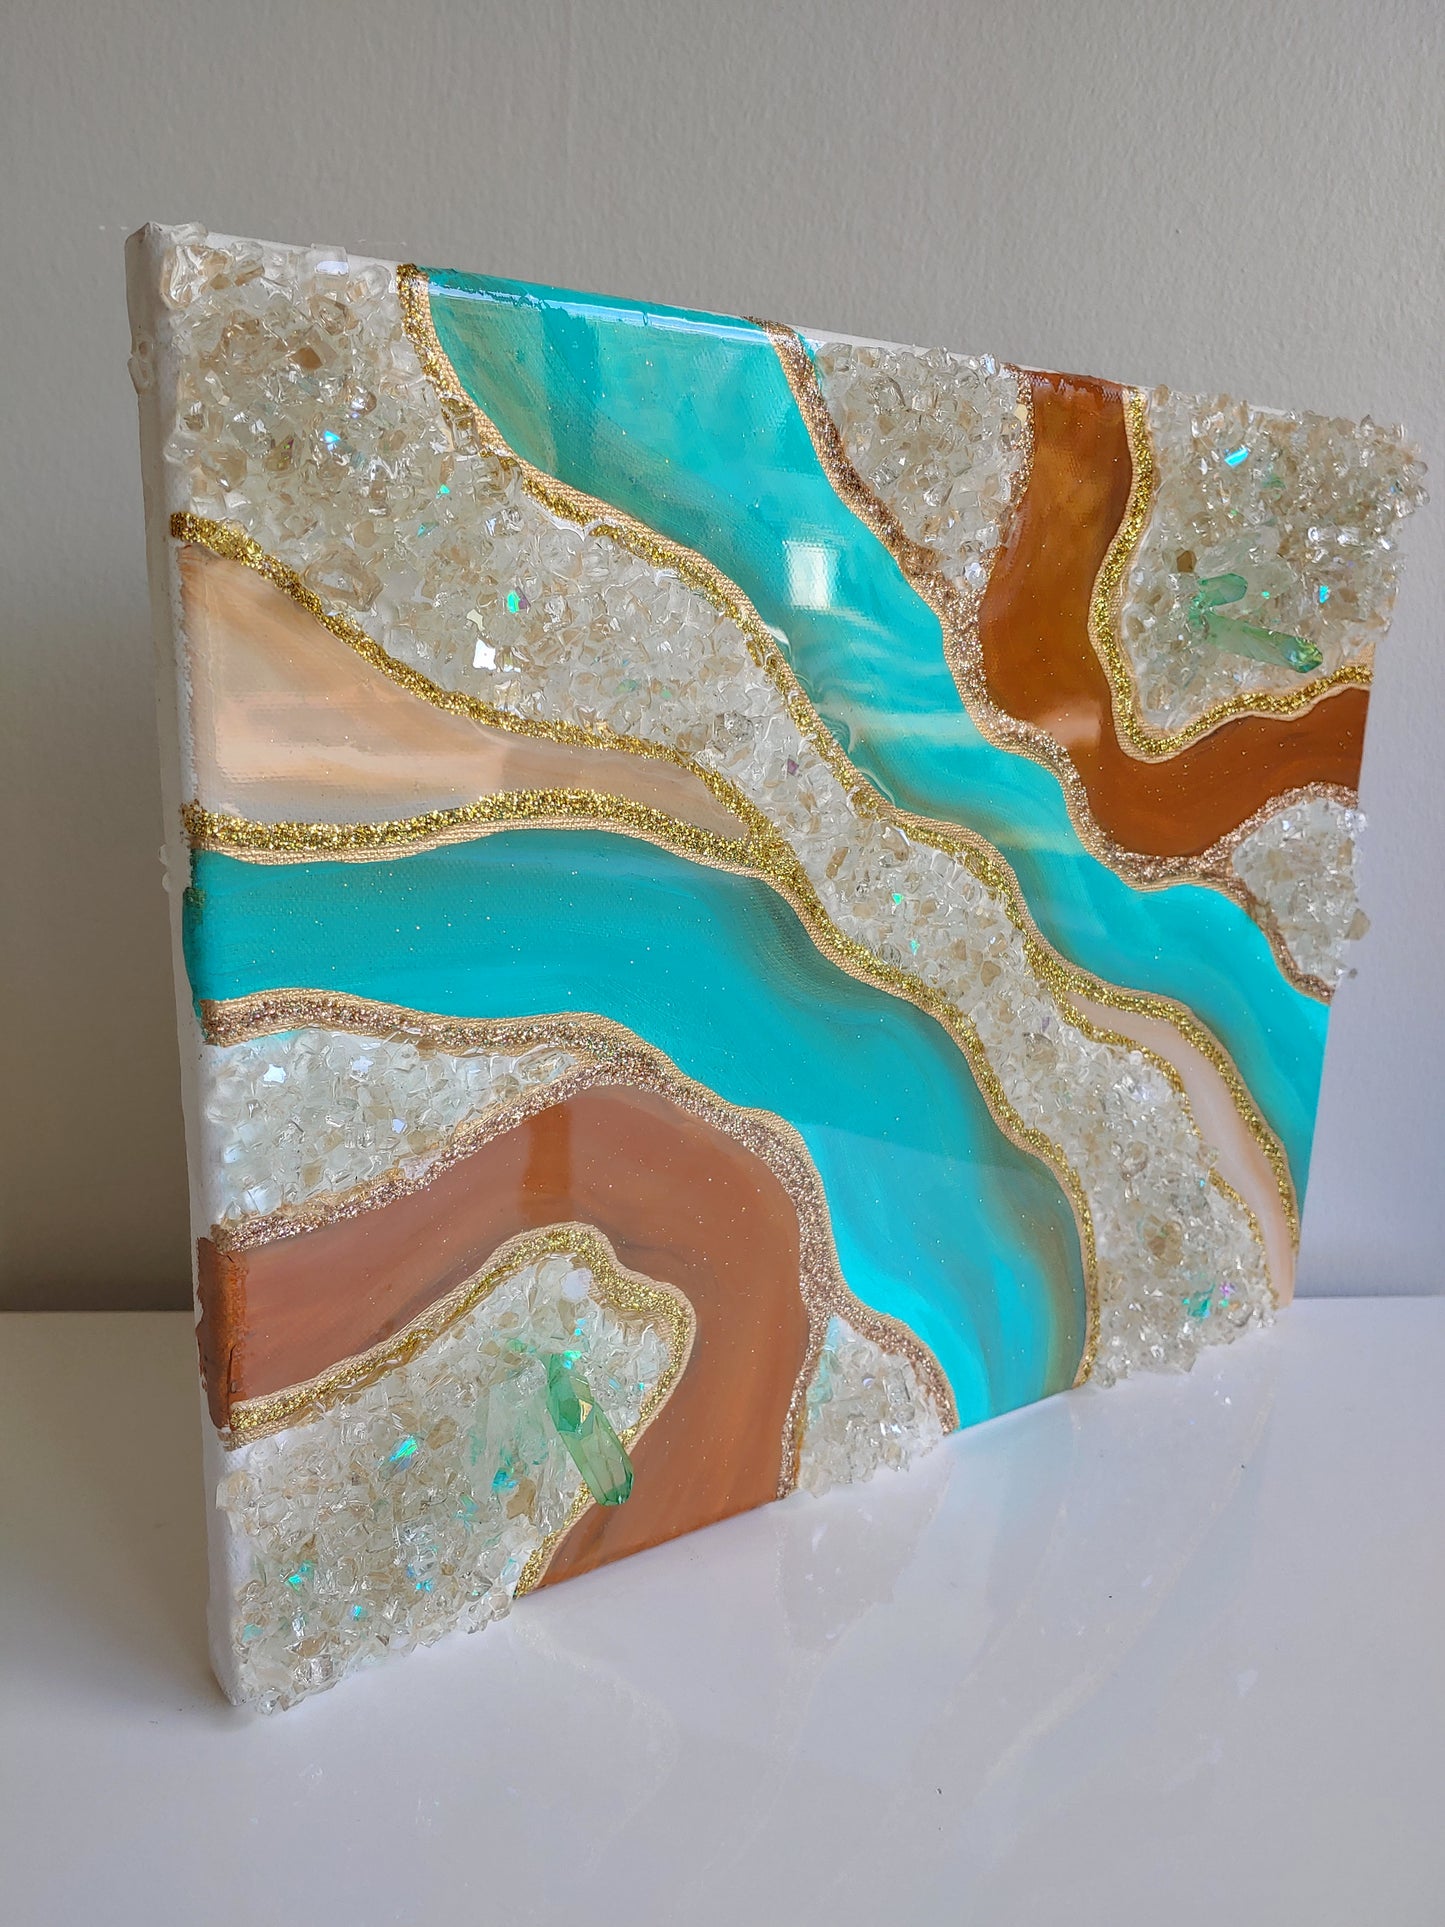 Turquoise and caramel geode artwork with glass and crystals